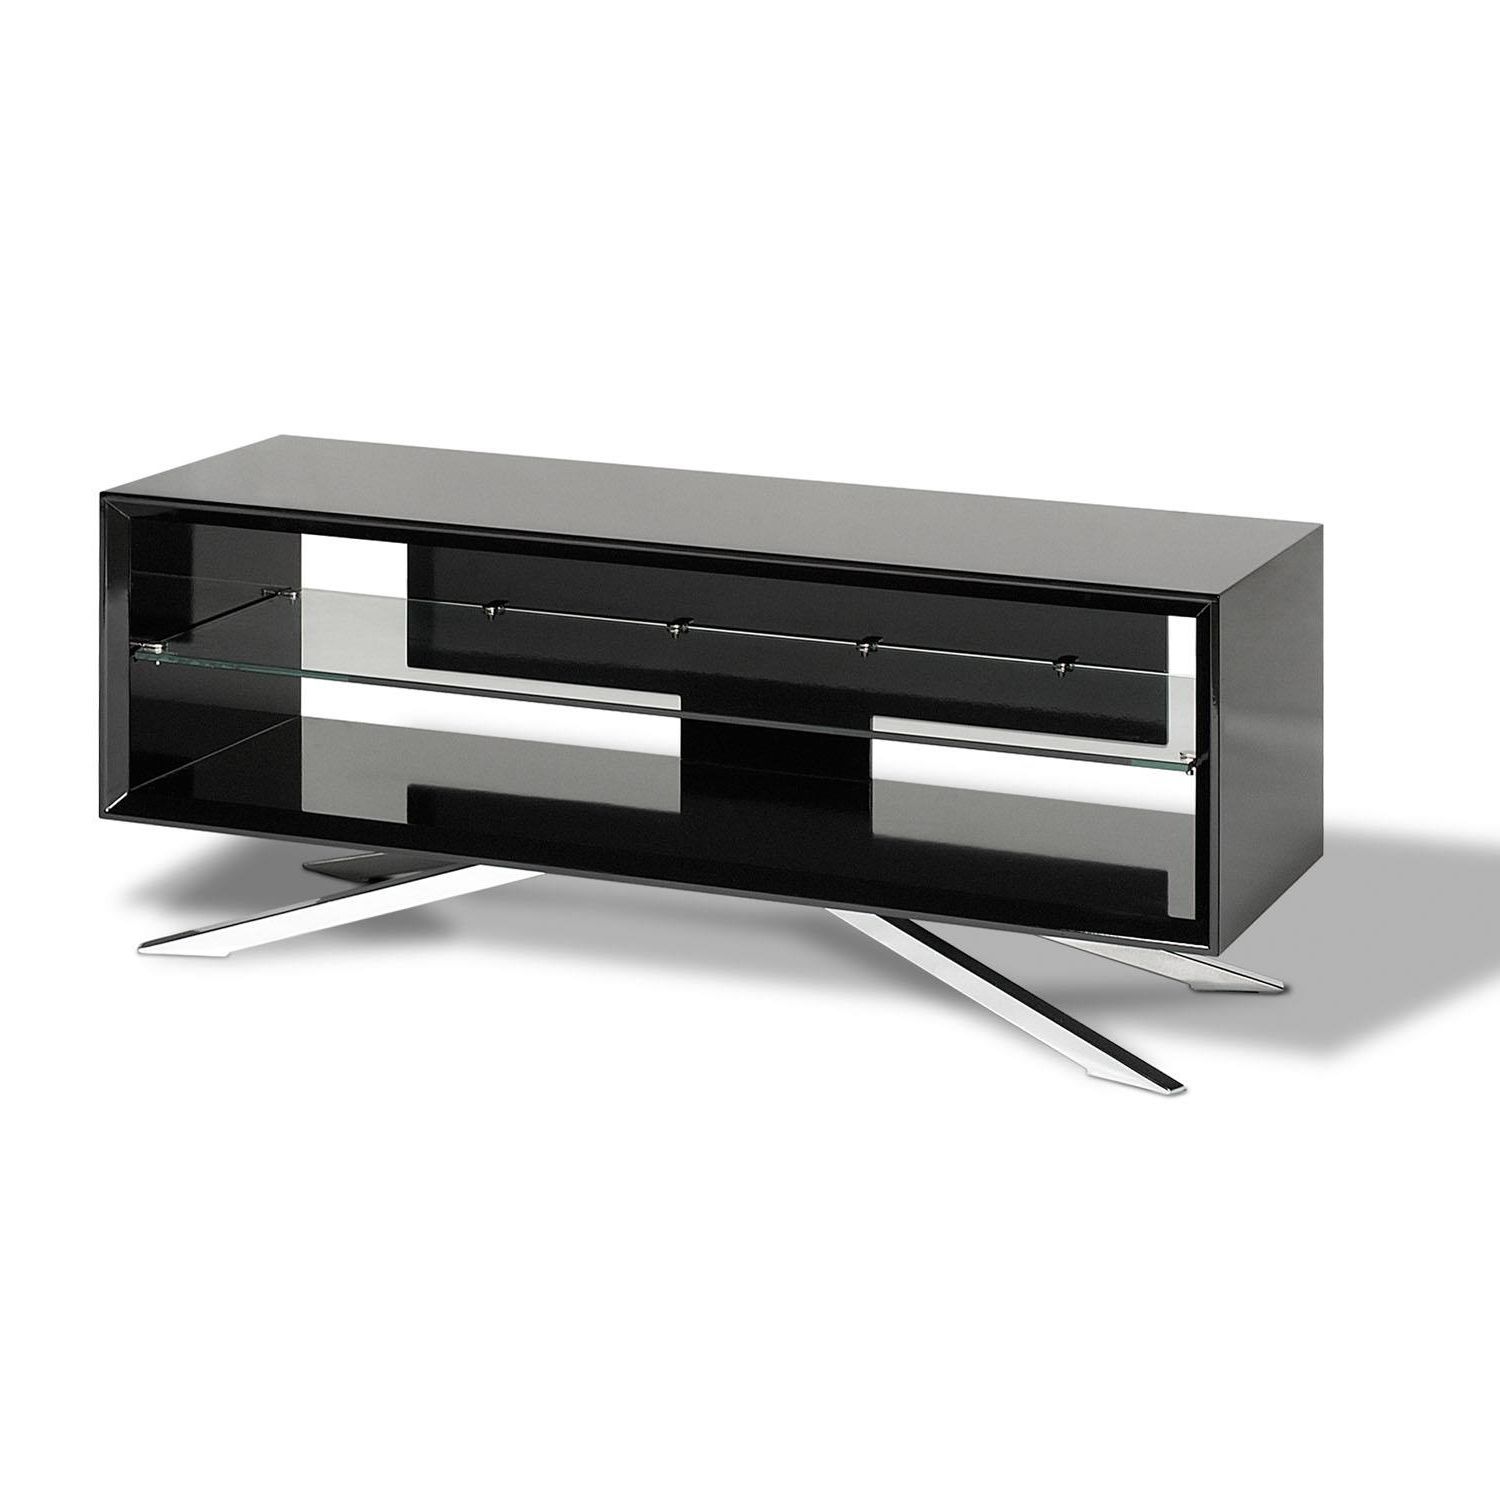 Well Liked Techlink Arena Tv Stands Pertaining To Sevenoaks Sound And Vision – Techlink Arena Aa110 Tv Unit (View 9 of 20)